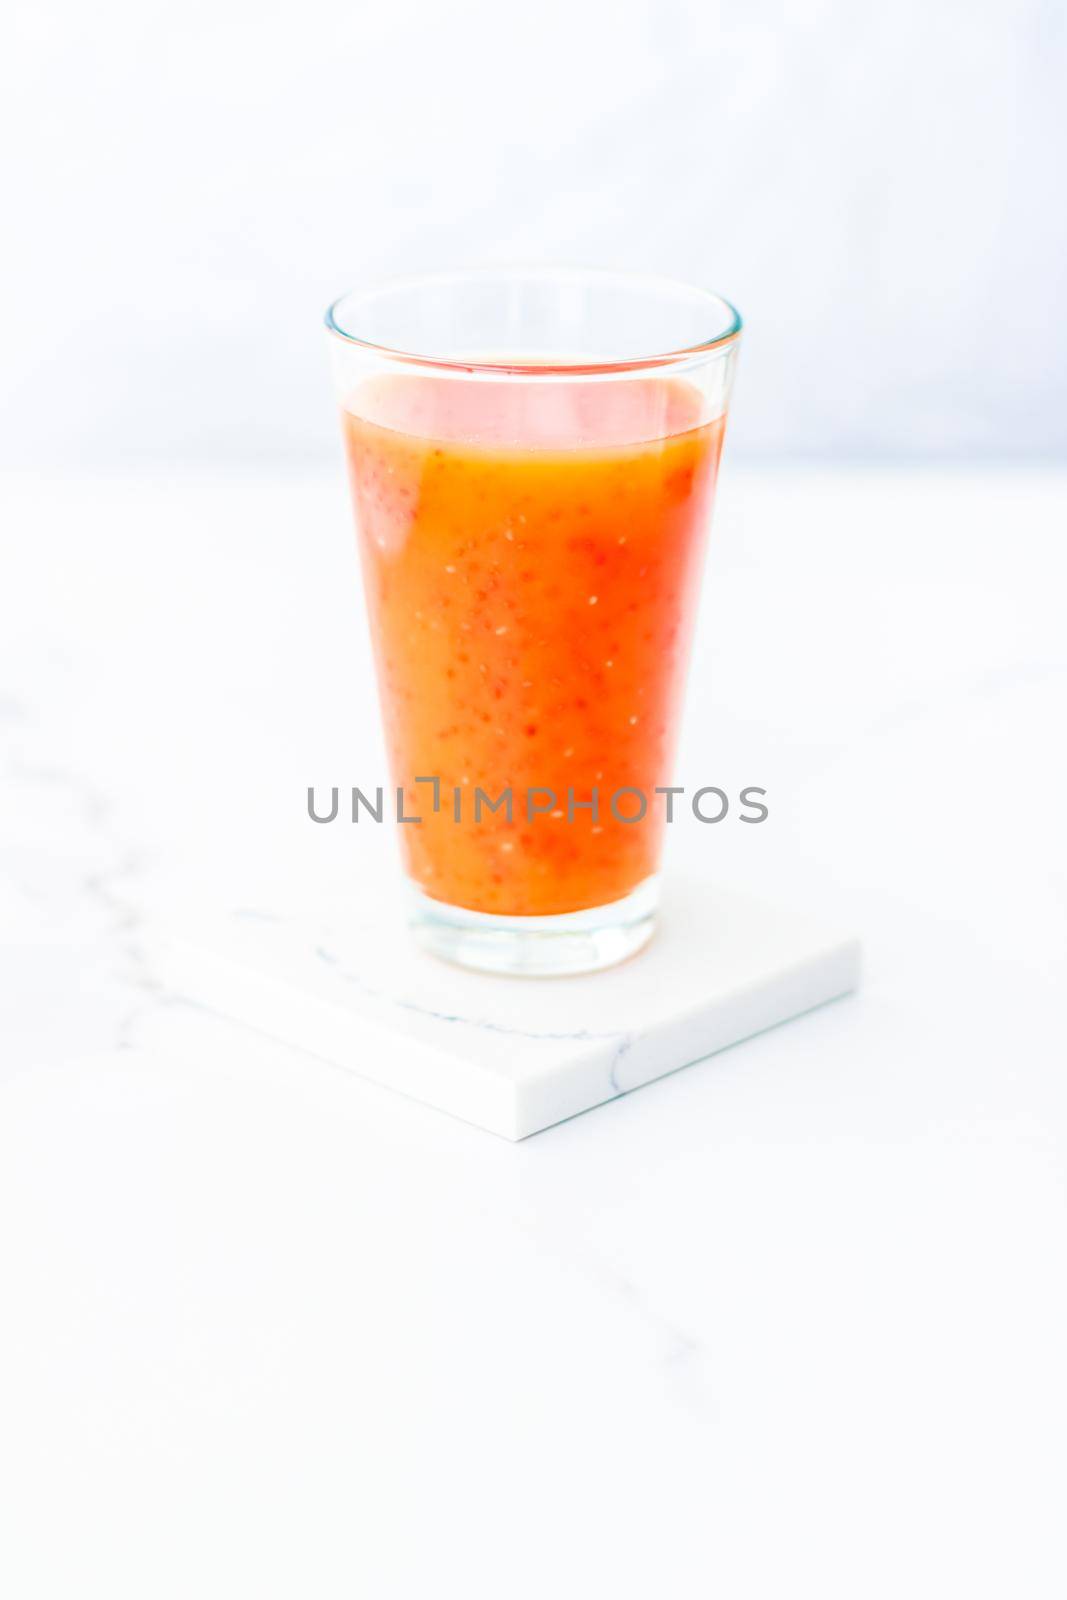 Healthy nutrition, organic drink and fasting cleanse concept - Glass of red fruit smoothie juice with chia seeds for diet detox, perfect breakfast recipe